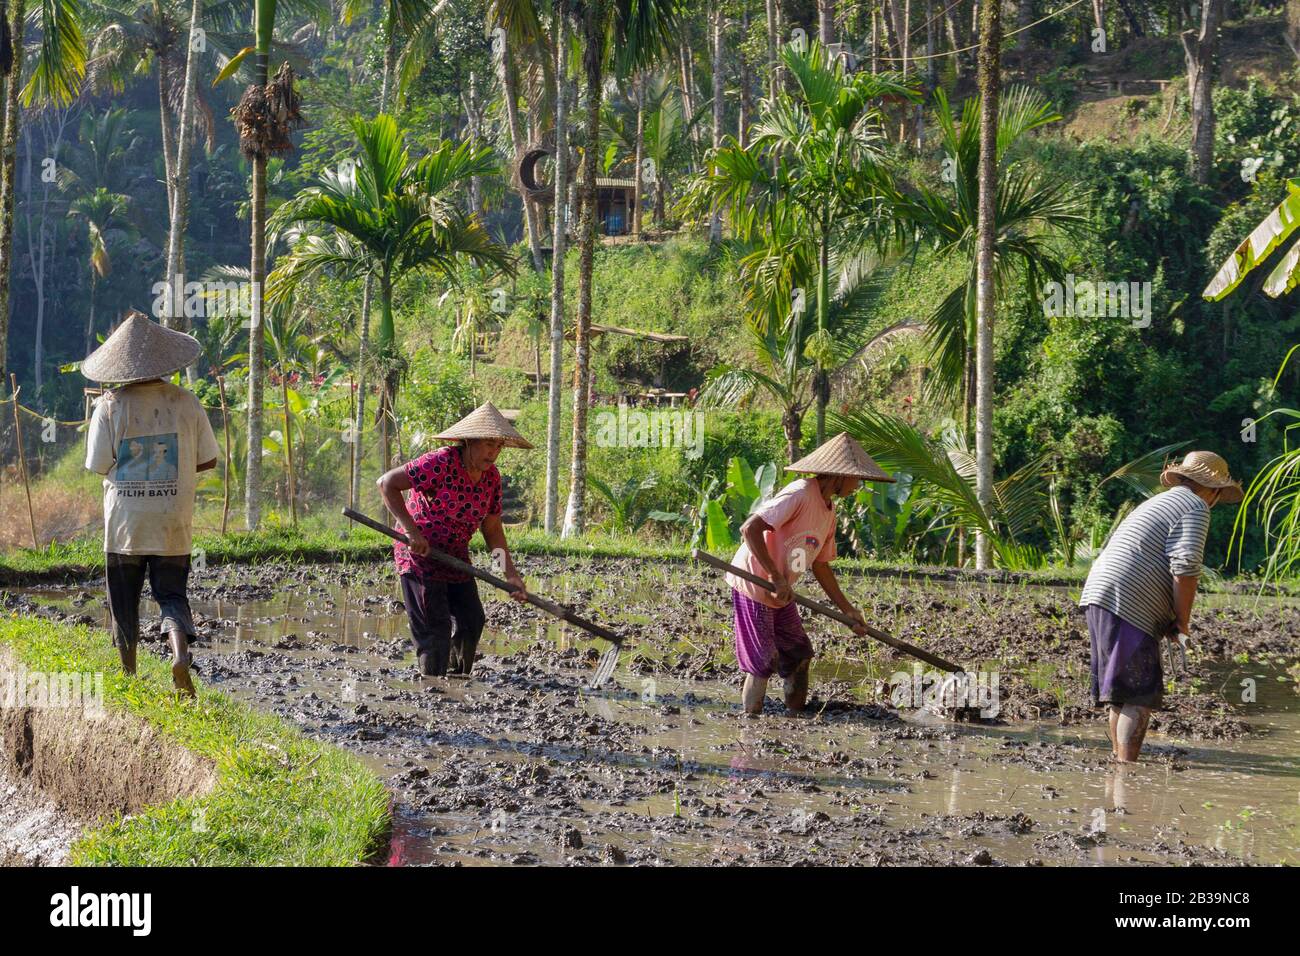 Bali Indonesia 3 Septemper 2019 : Rice field workers.Farmers are planting rice in the fields on rice terraces. Stock Photo